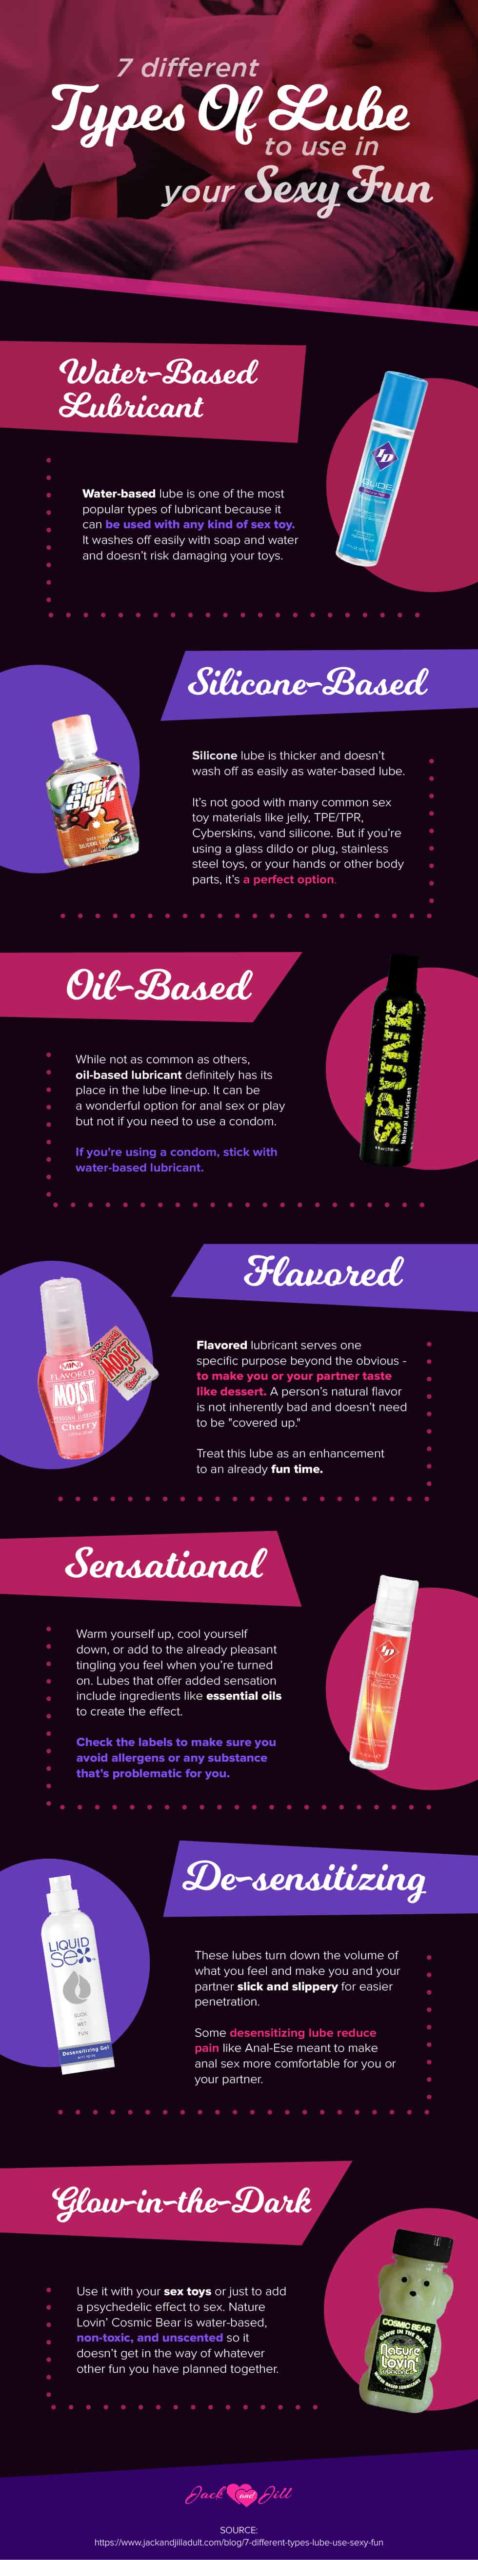 Infographic for 7 Different Types of Lube to Use In Your Sexy Fun